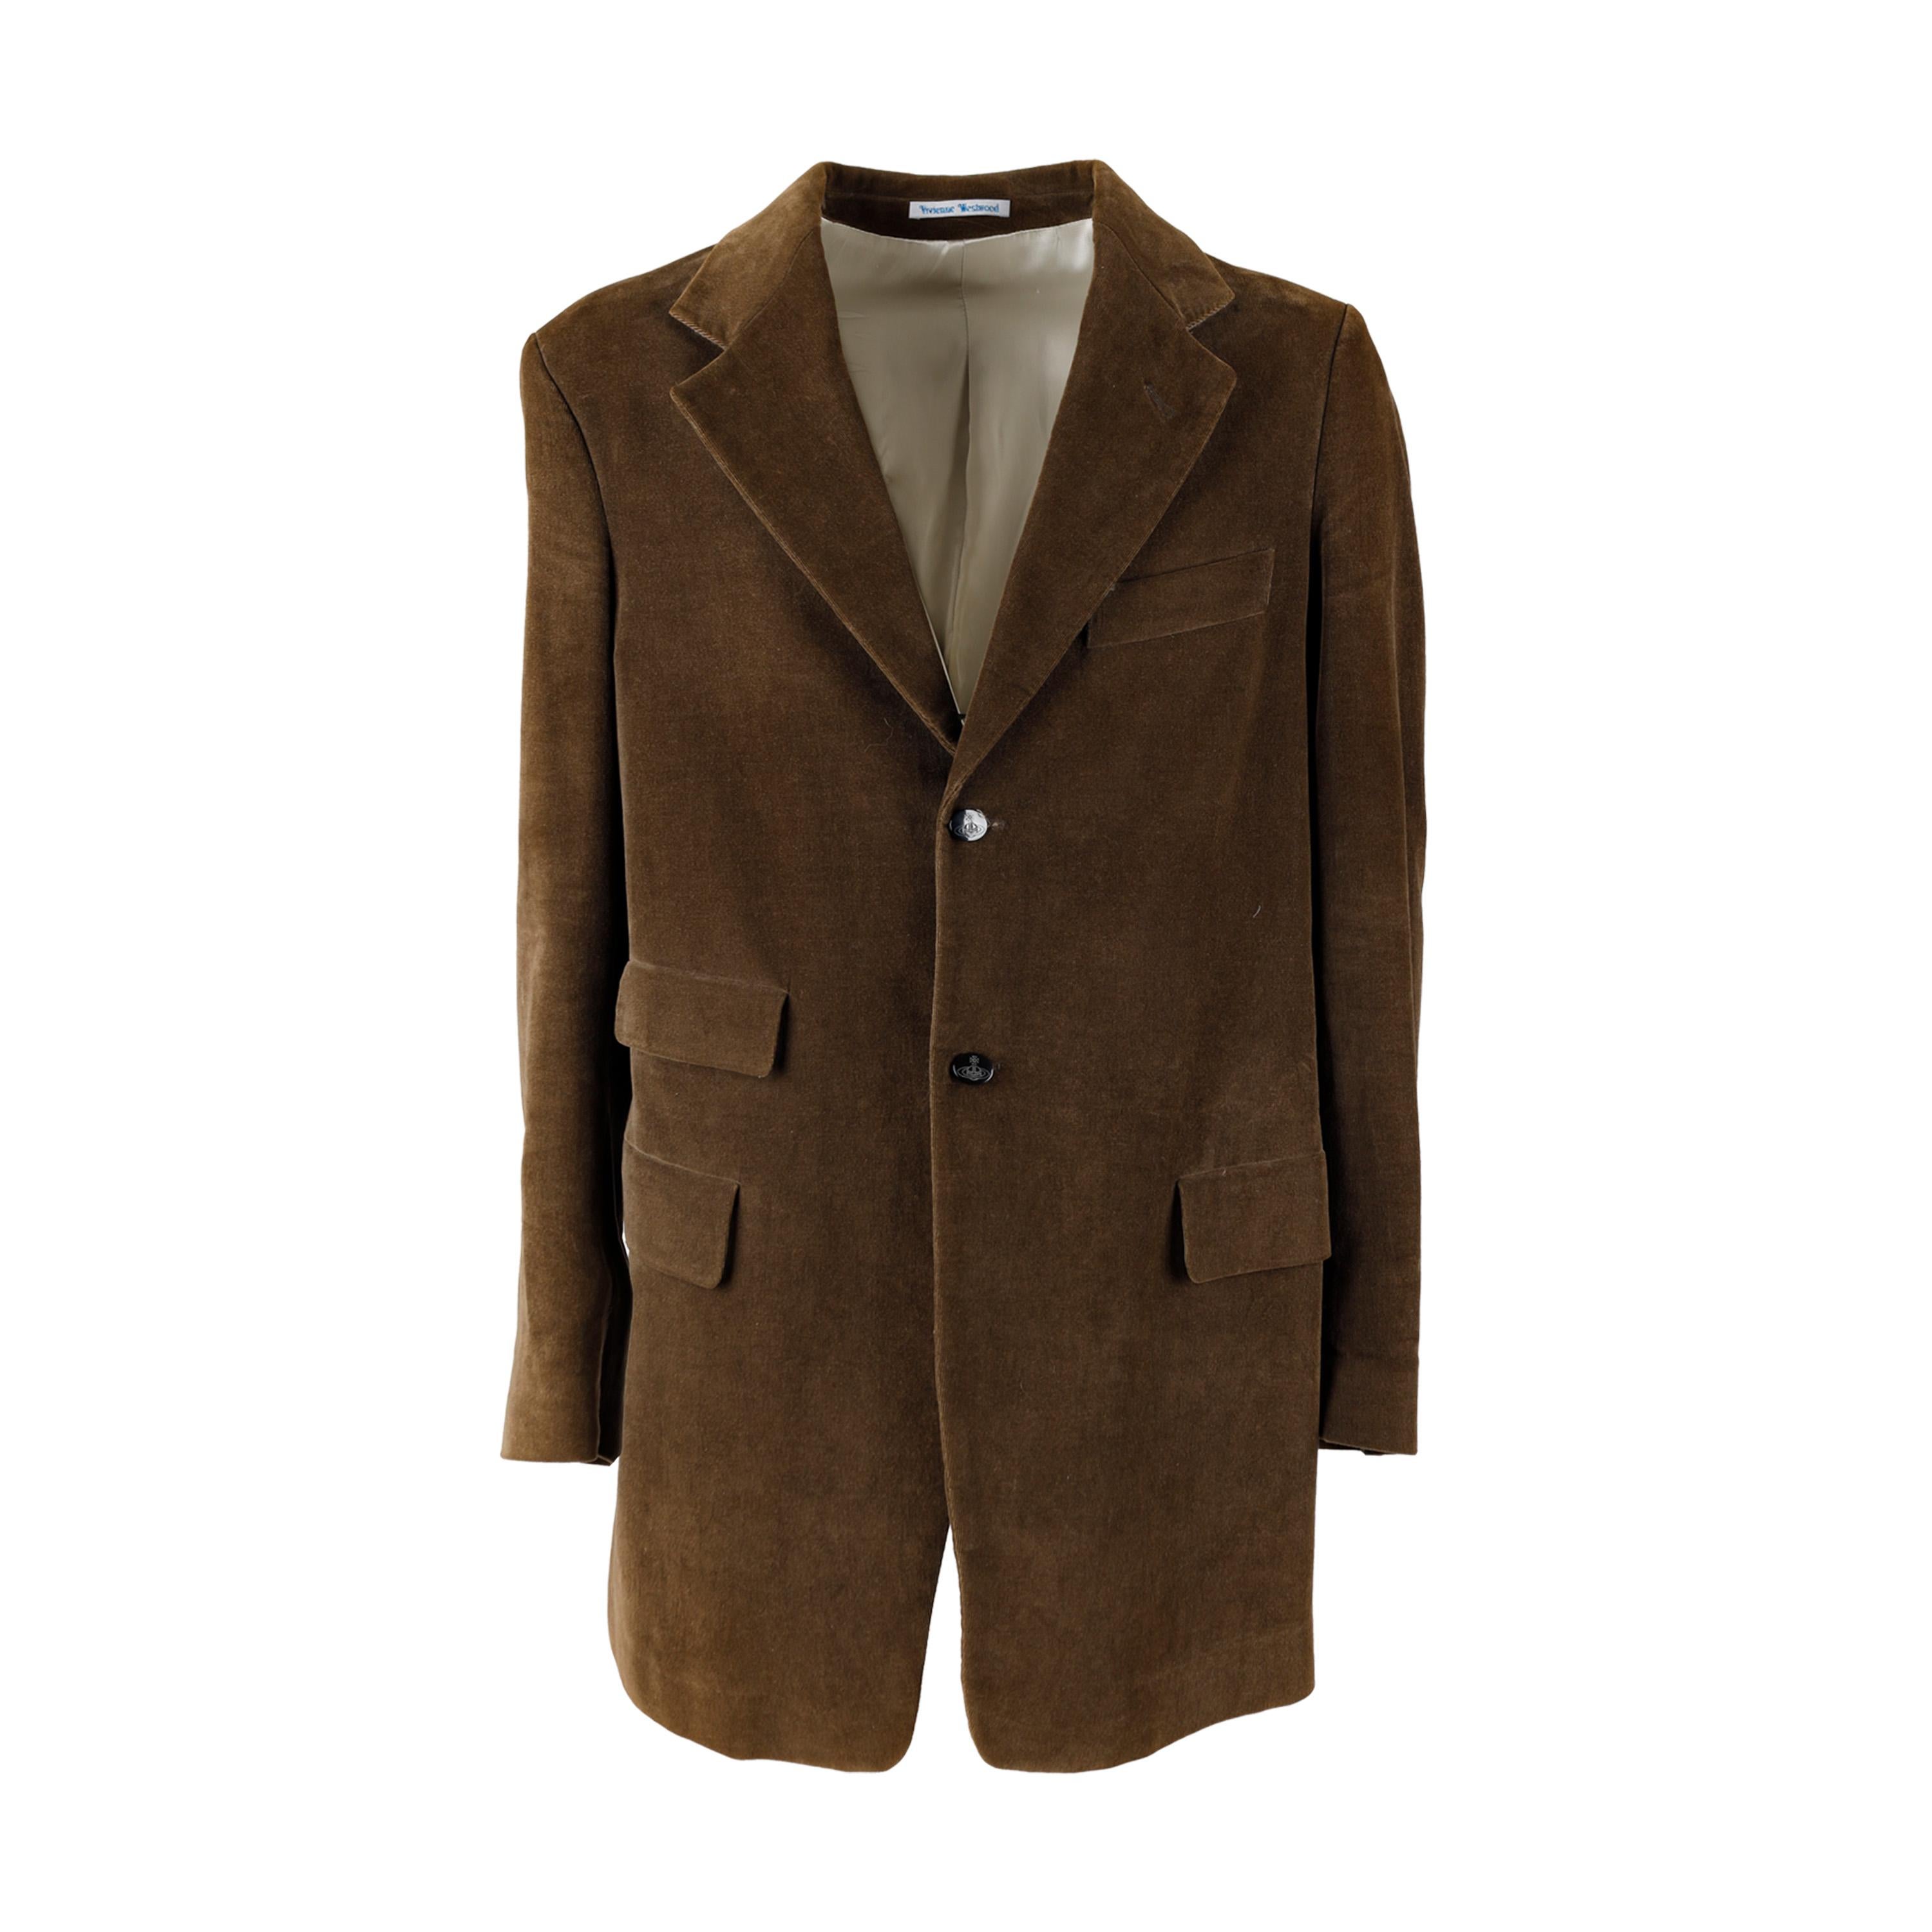 This Vivienne Westwood suit is crafted from a soft cotton corduroy fabric in a brown hue. Carefully designed details include a notched lapel, two-button closure, and 3 flap pockets, creating a classic look. The long jacket has a comfortable fit and